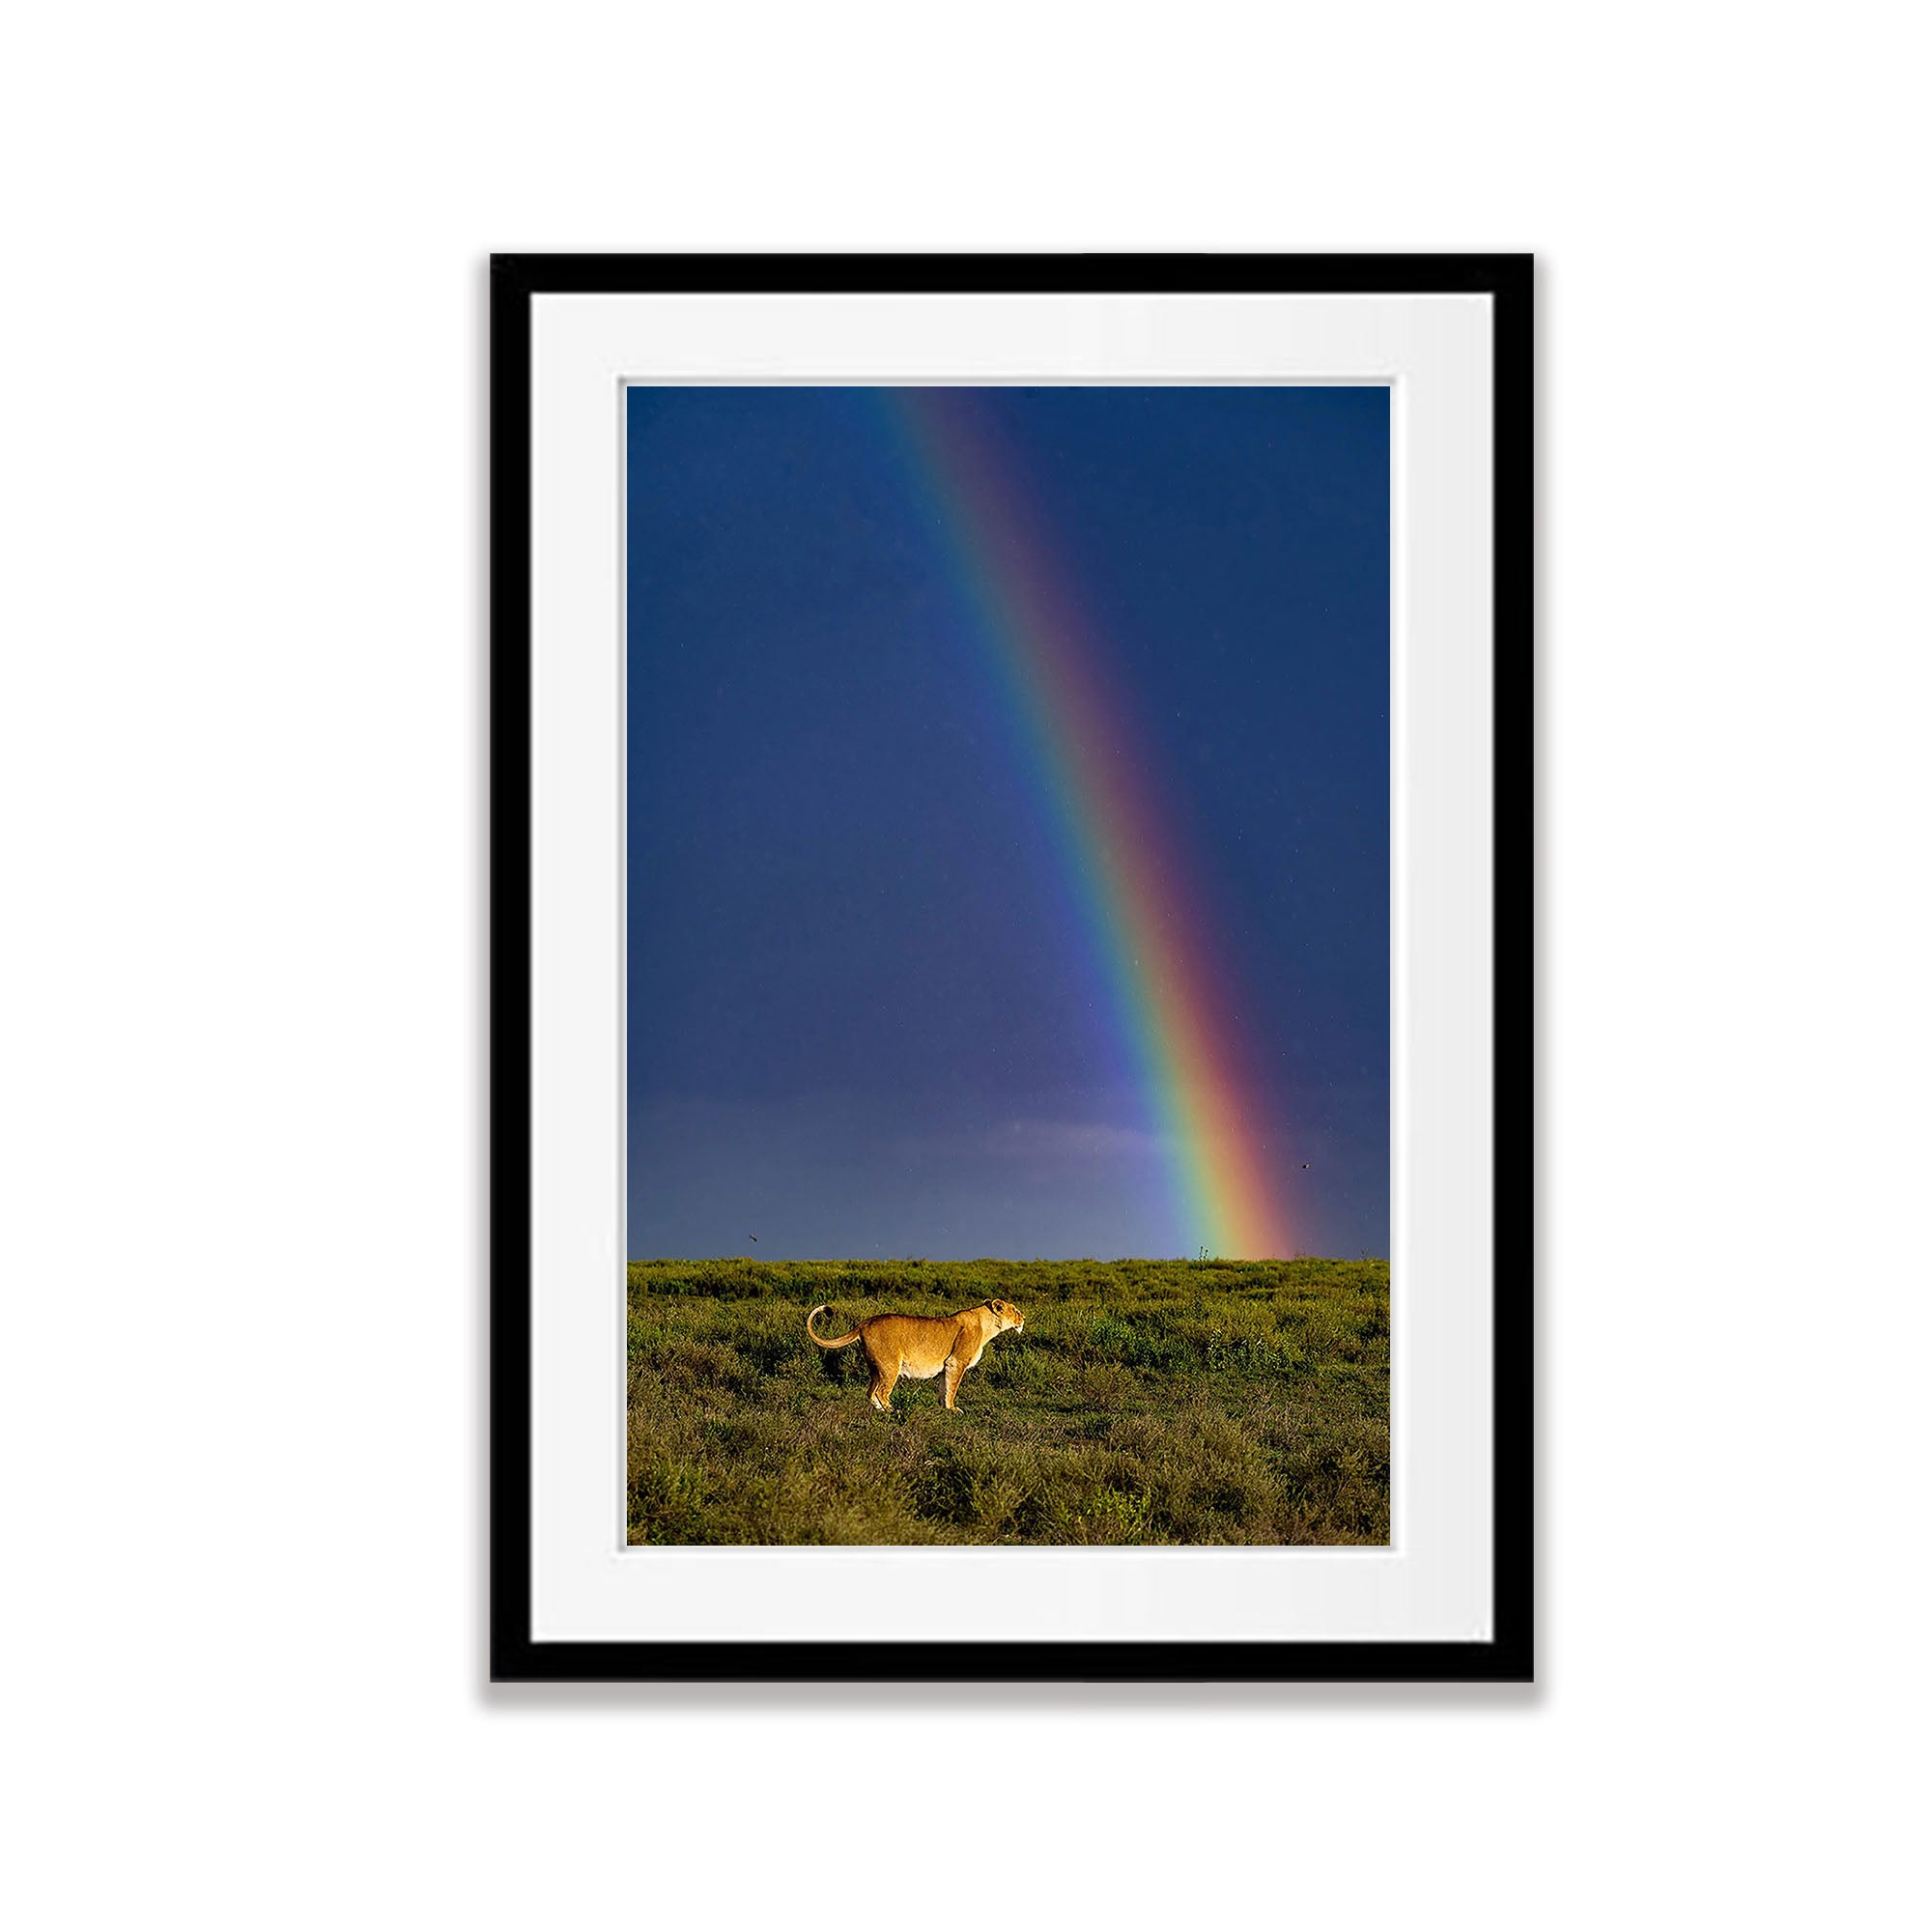 A pregnant lion and rainbow in the Serengeti, Tanzania